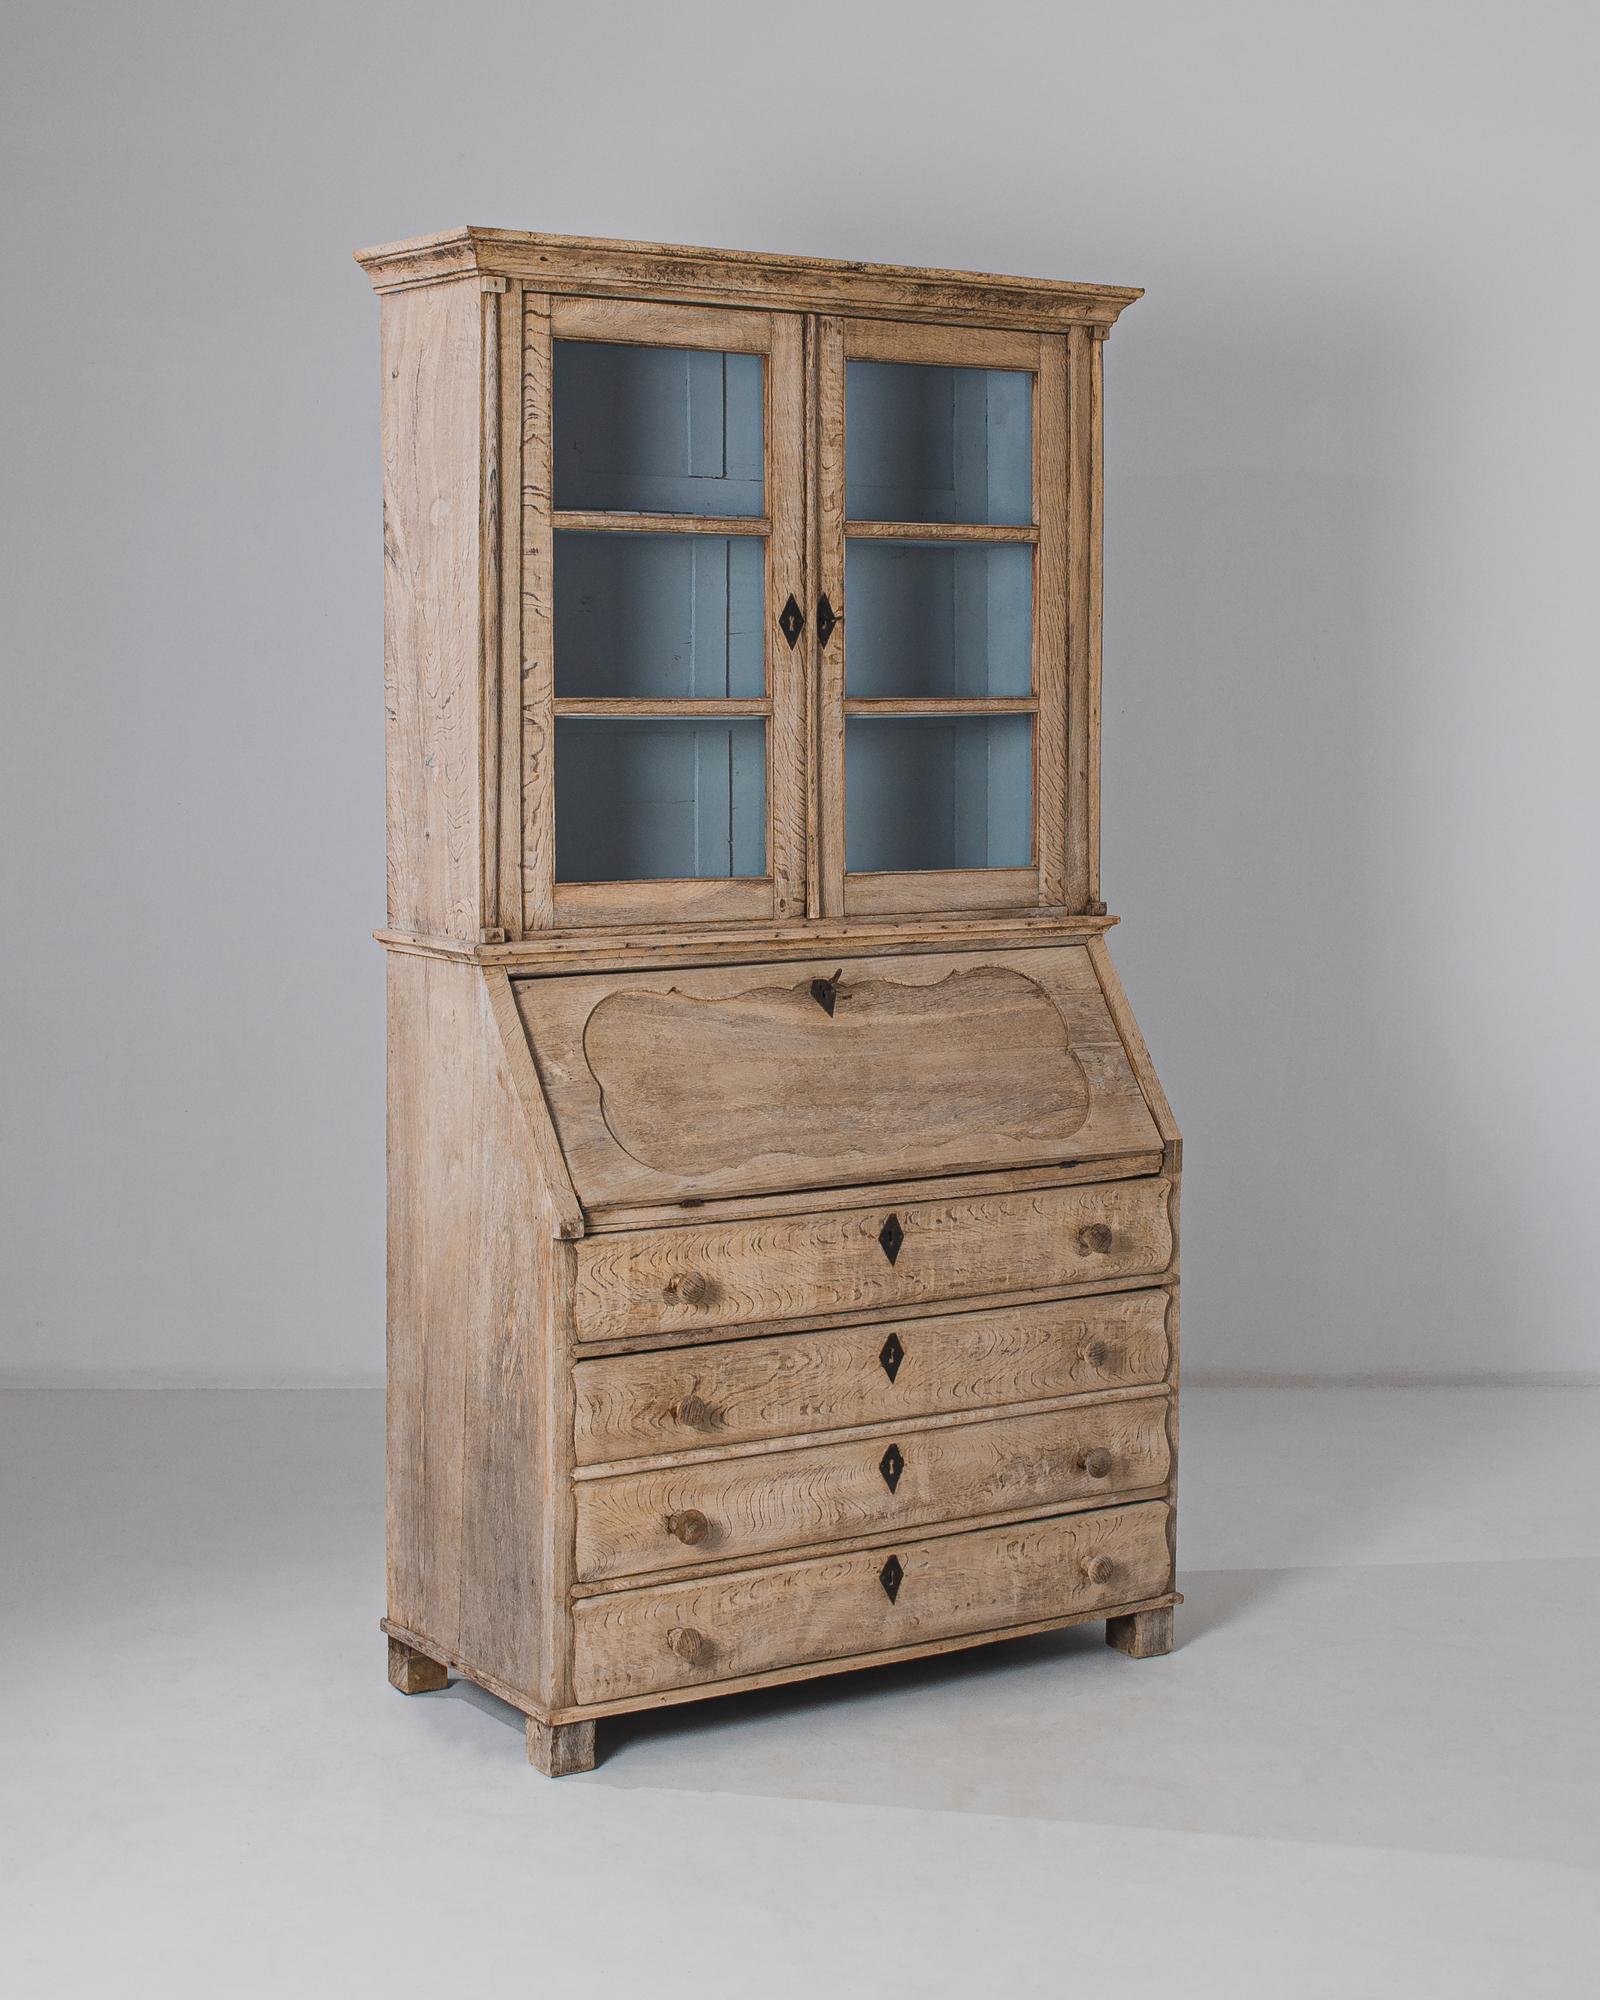 This bleached oak secretary desk and vitrine was made in Belgium, circa 1880. The calming sky blue interior of the upper vitrine complements the rustic tone of the wood, meticulously finished in our atelier. The contoured paneling of the slanted